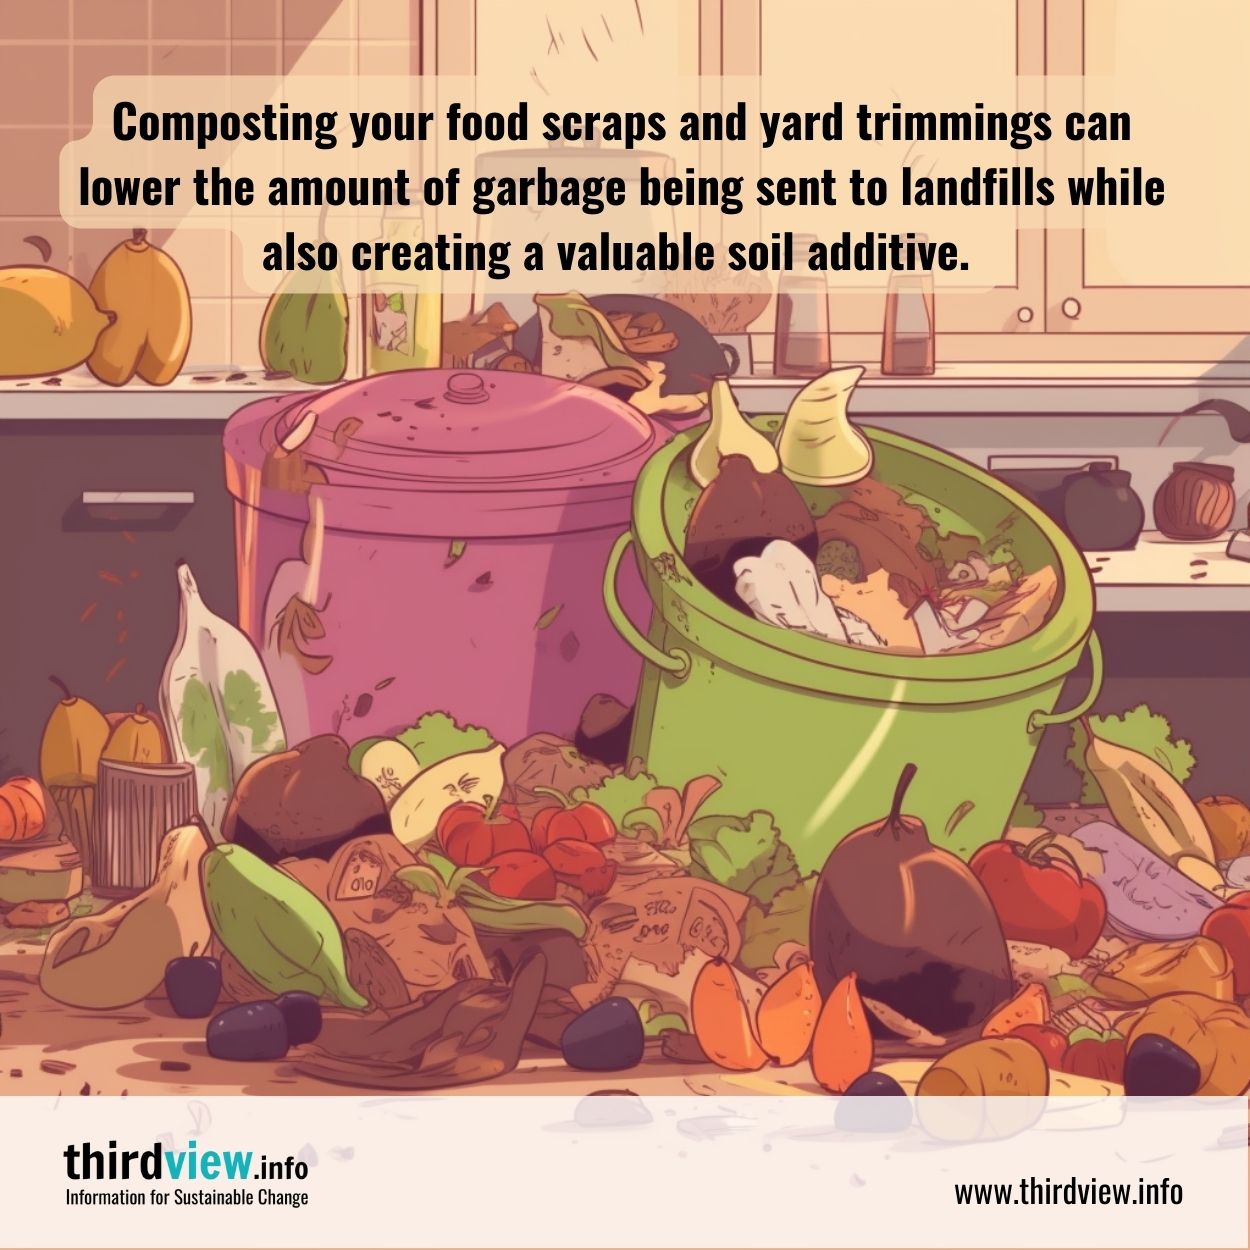 Home composting is a sustainable practice that helps reduce waste output, saves money, and attracts beneficial microorganisms.